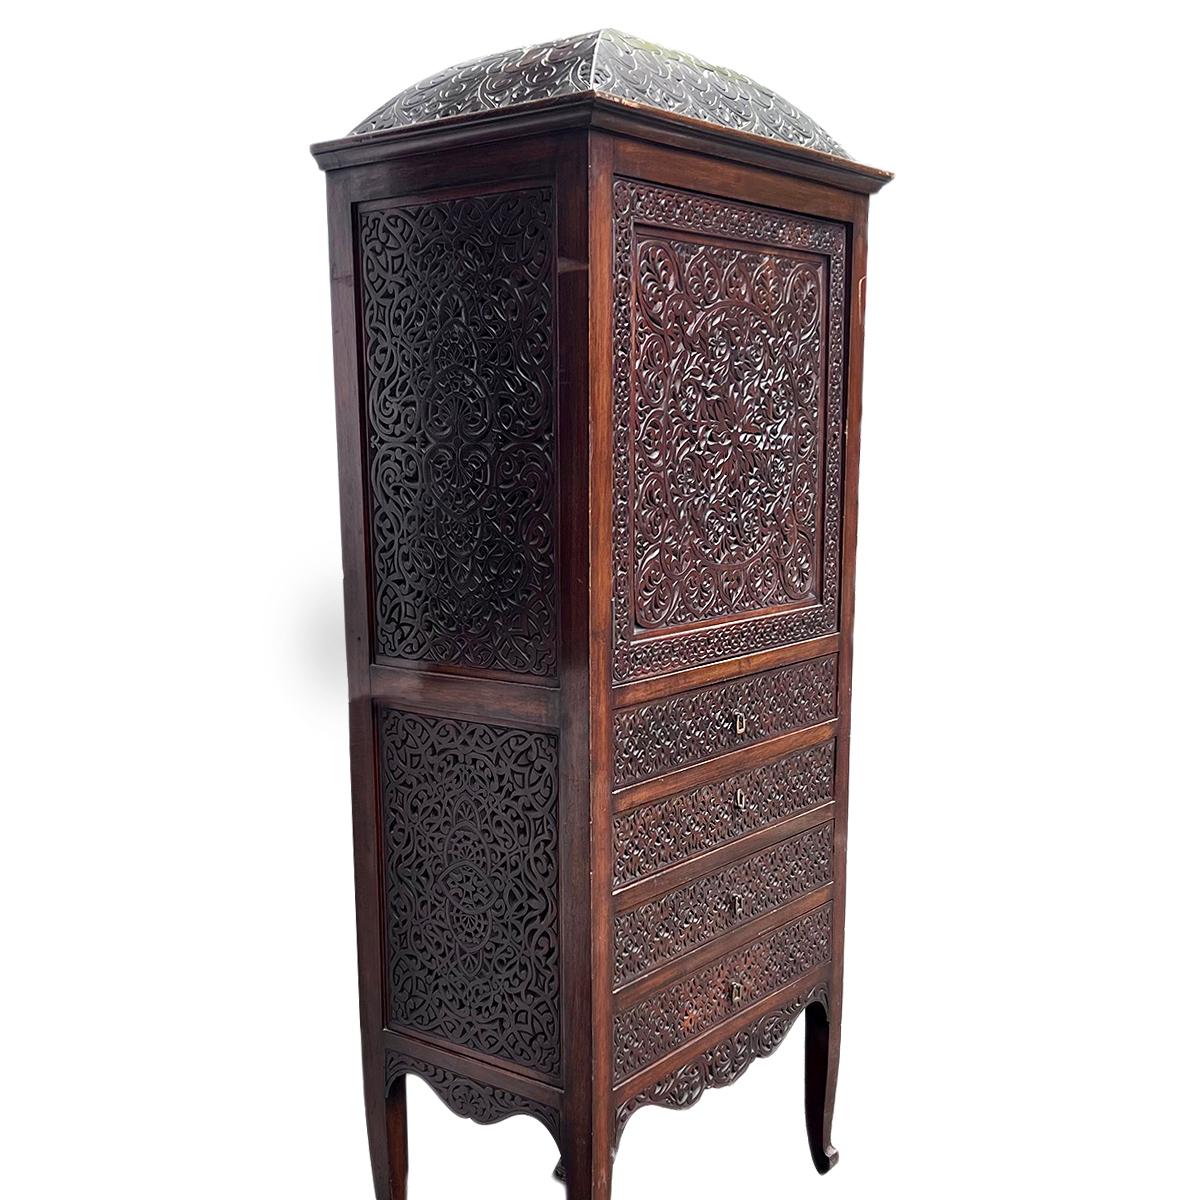 A circa 1920s English carved wood cabinet with arabesque motif on front and sides.

Measurements:
Height:70.75